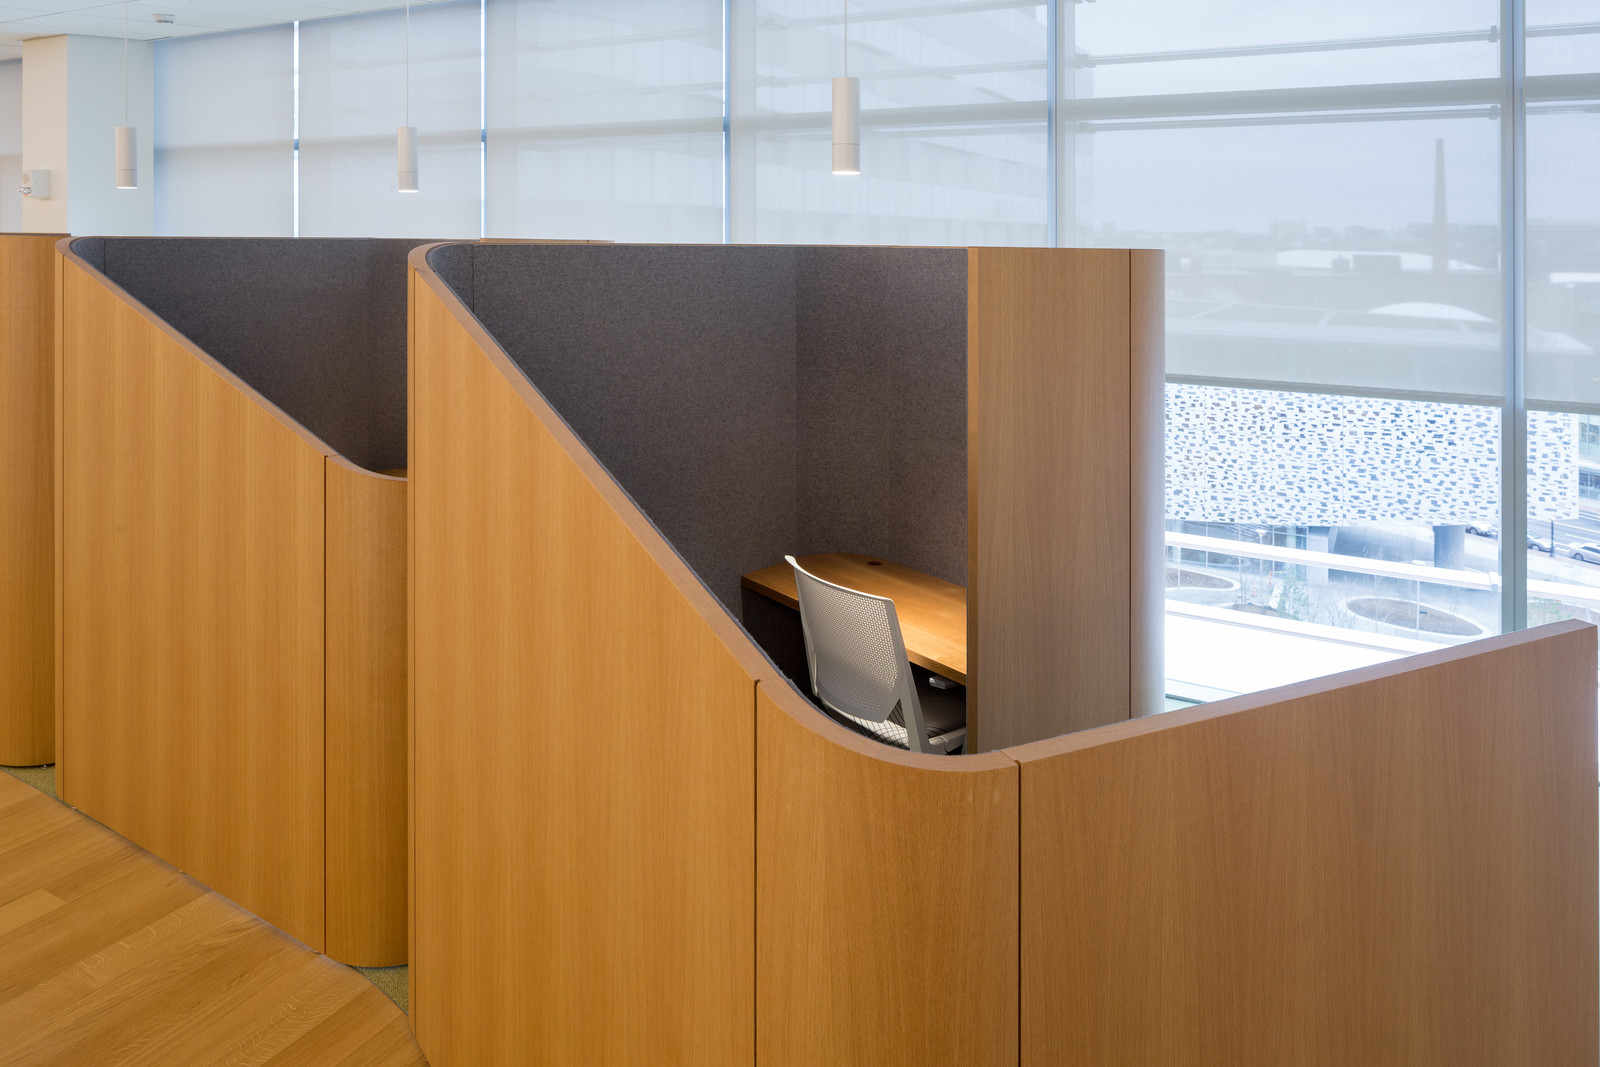 These gorgeous custom cubicles make for a warm and private breakout space